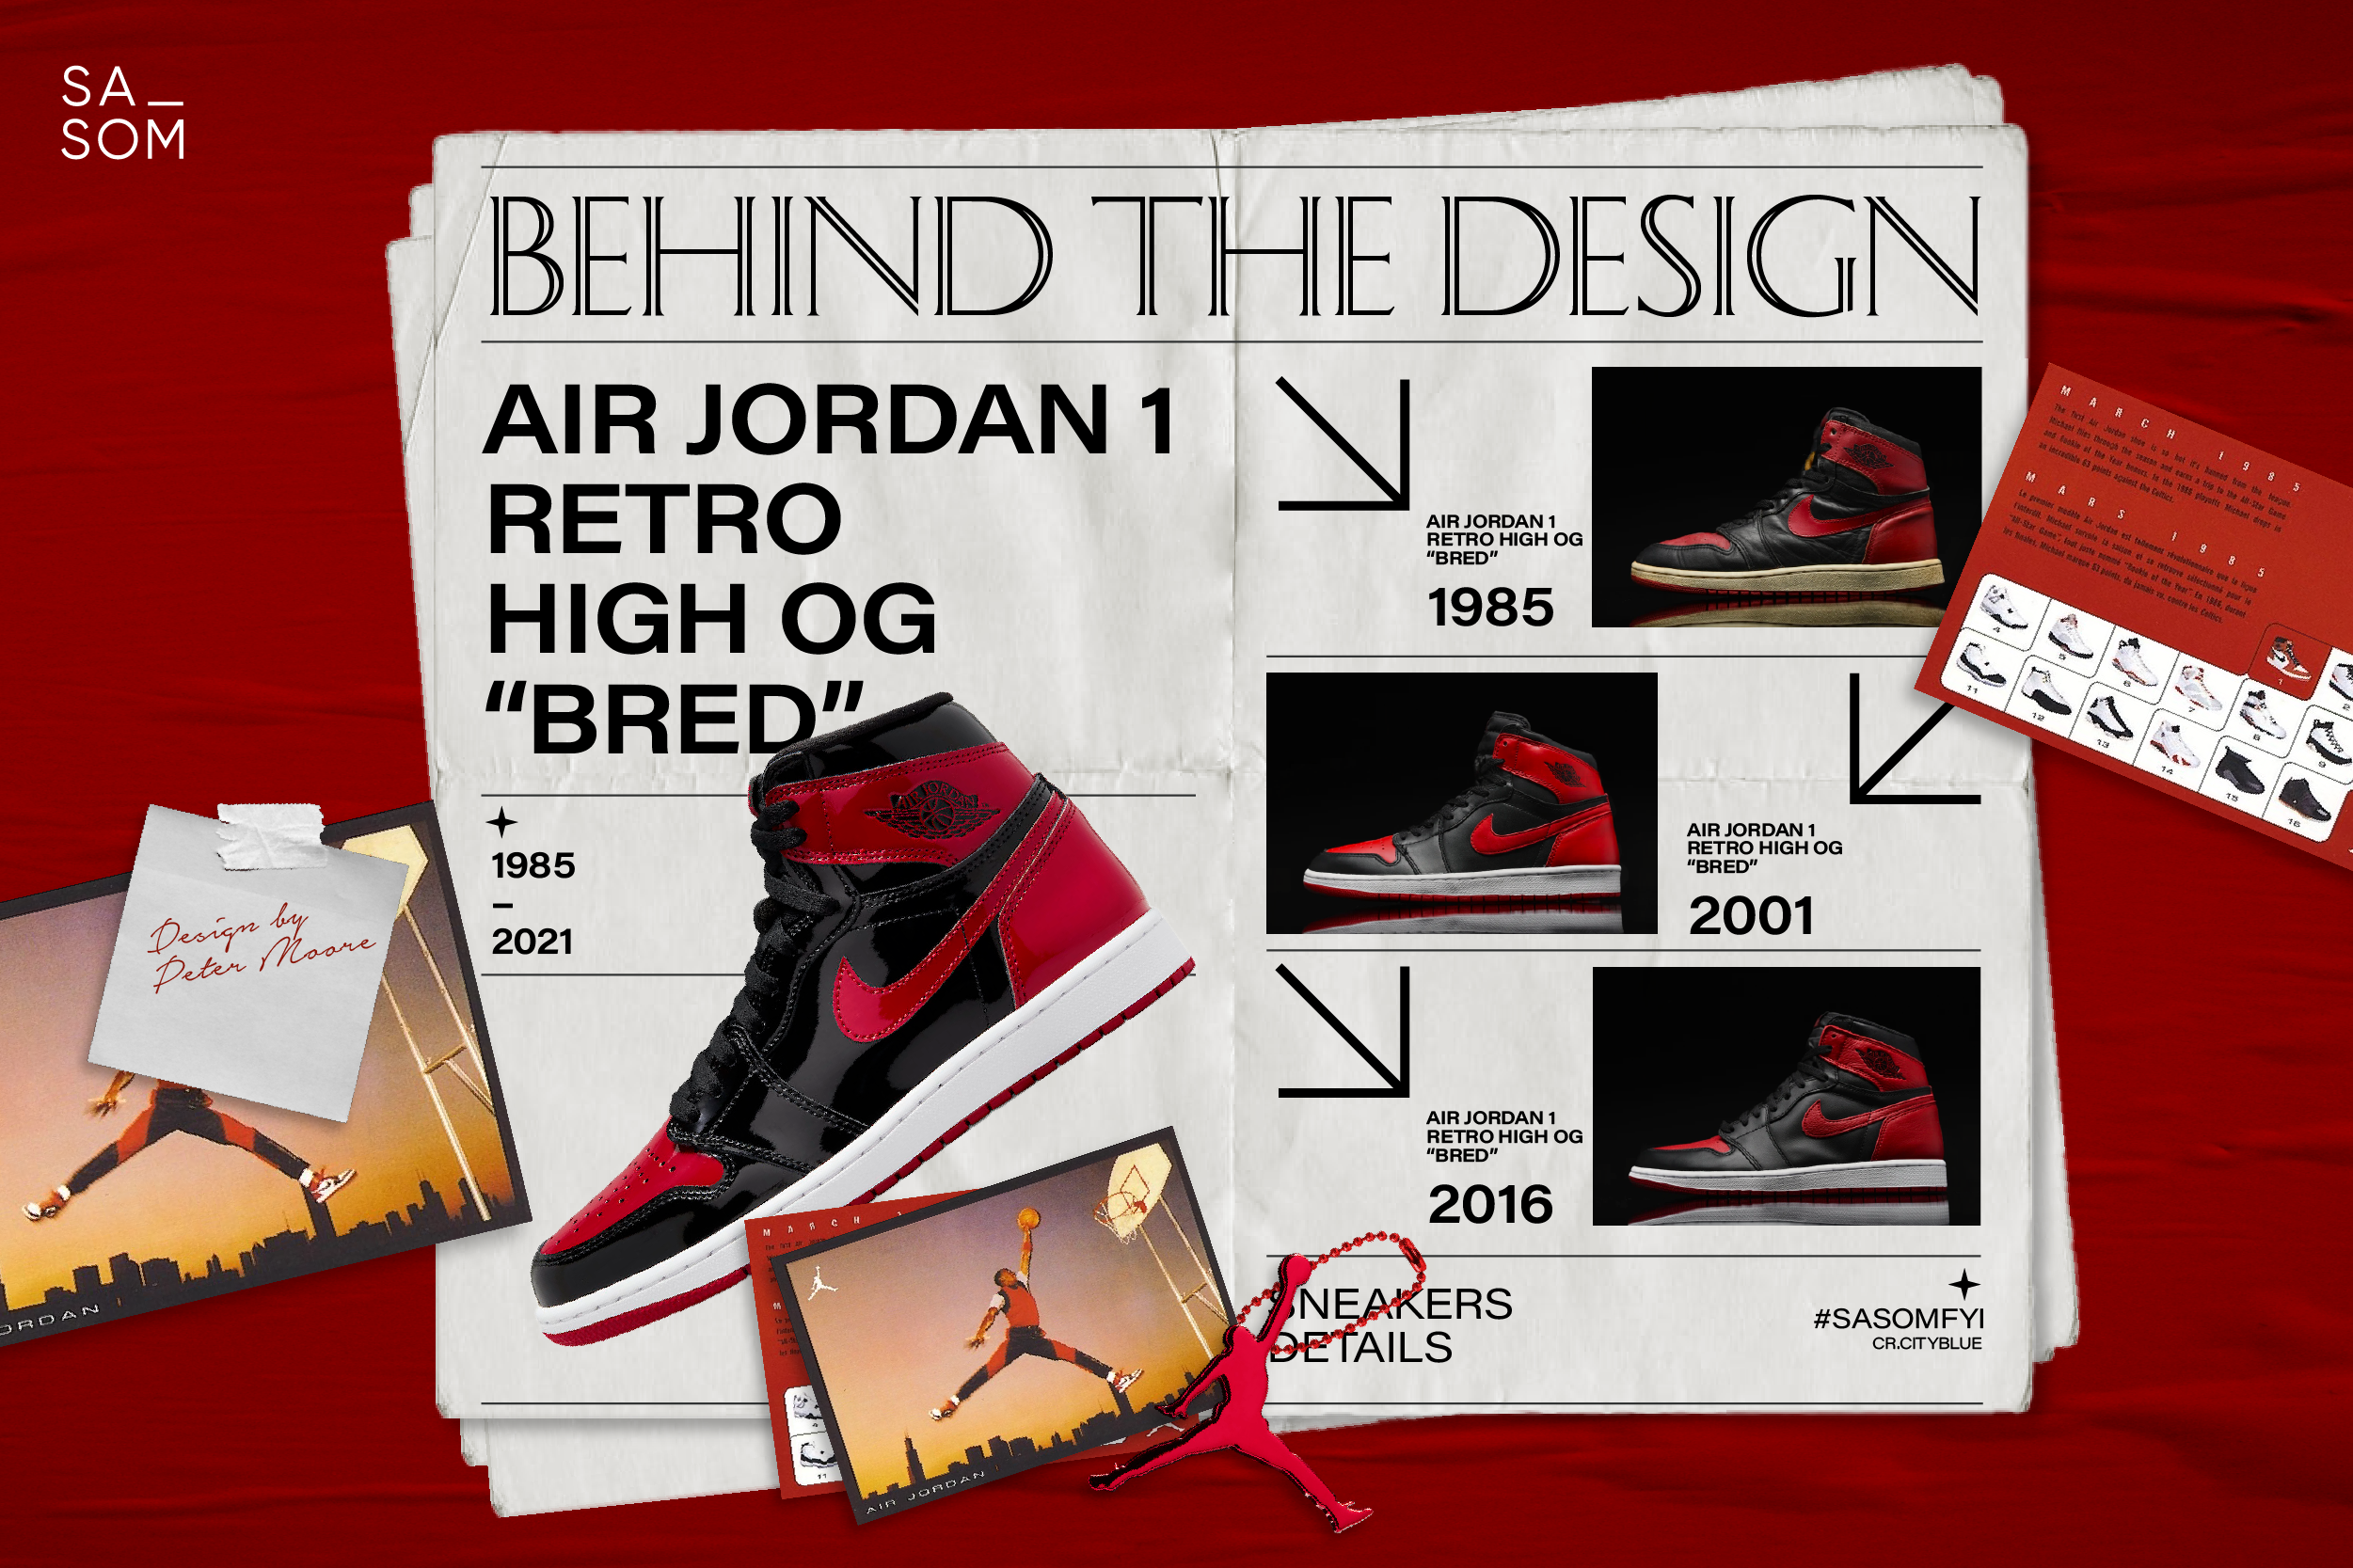 The Complete 36 Years History of Air Jordan 1 High OG “Bred”